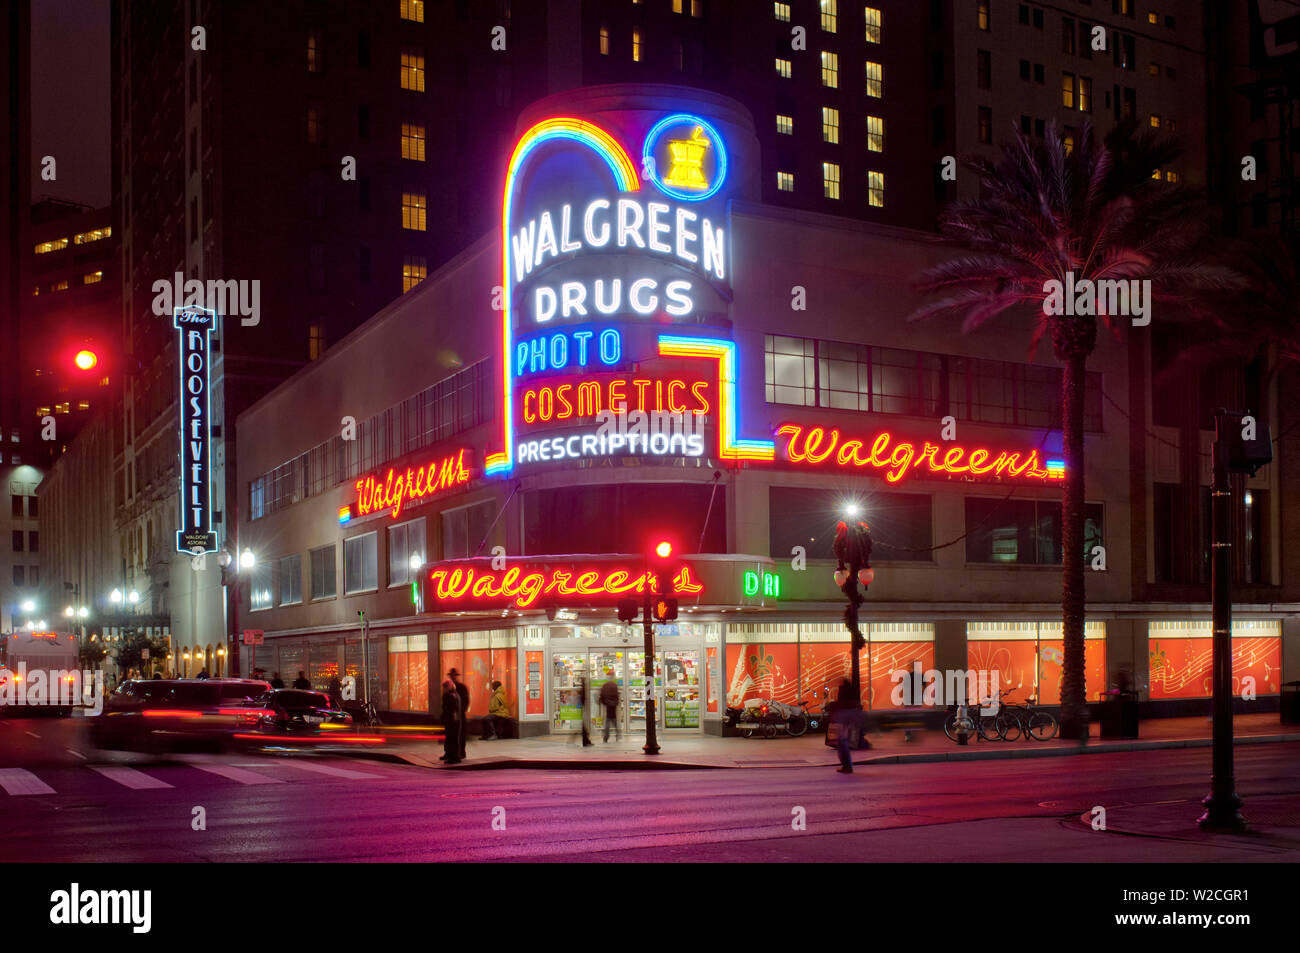 Louisiana, New Orleans, Canal Street, Walgreens Drug Store, 1938, The Roosevelt Hotel Sign Stock Photo